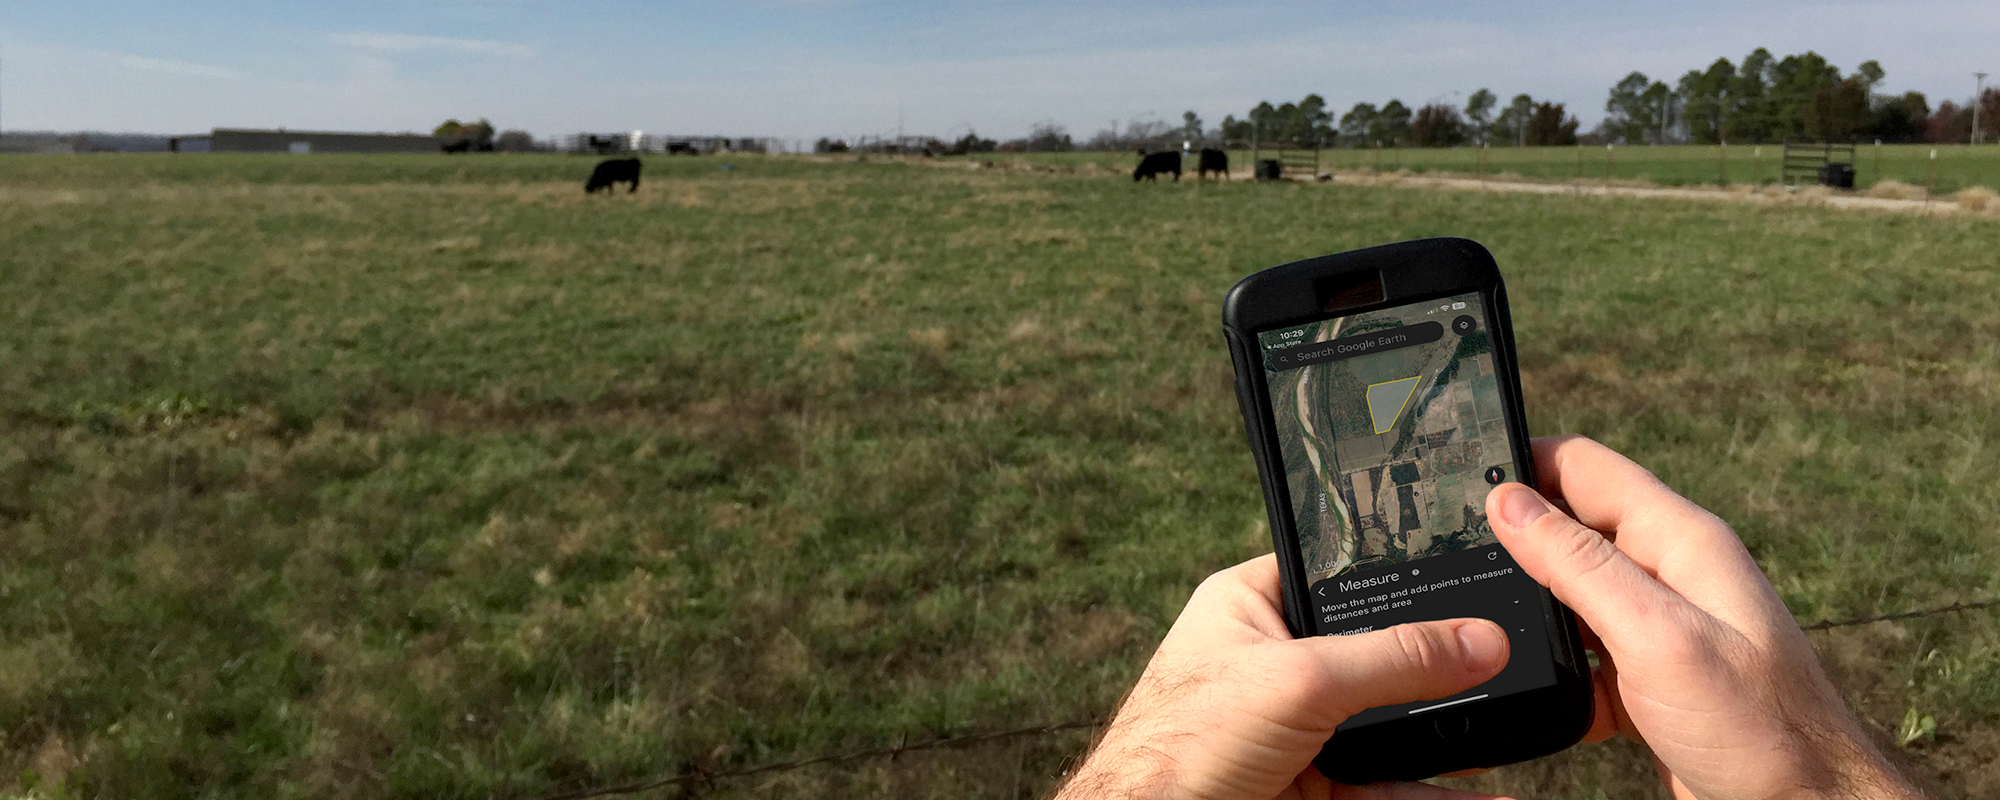 Tips to turn digital map app into a decision-making tool for regenerative grazing practices